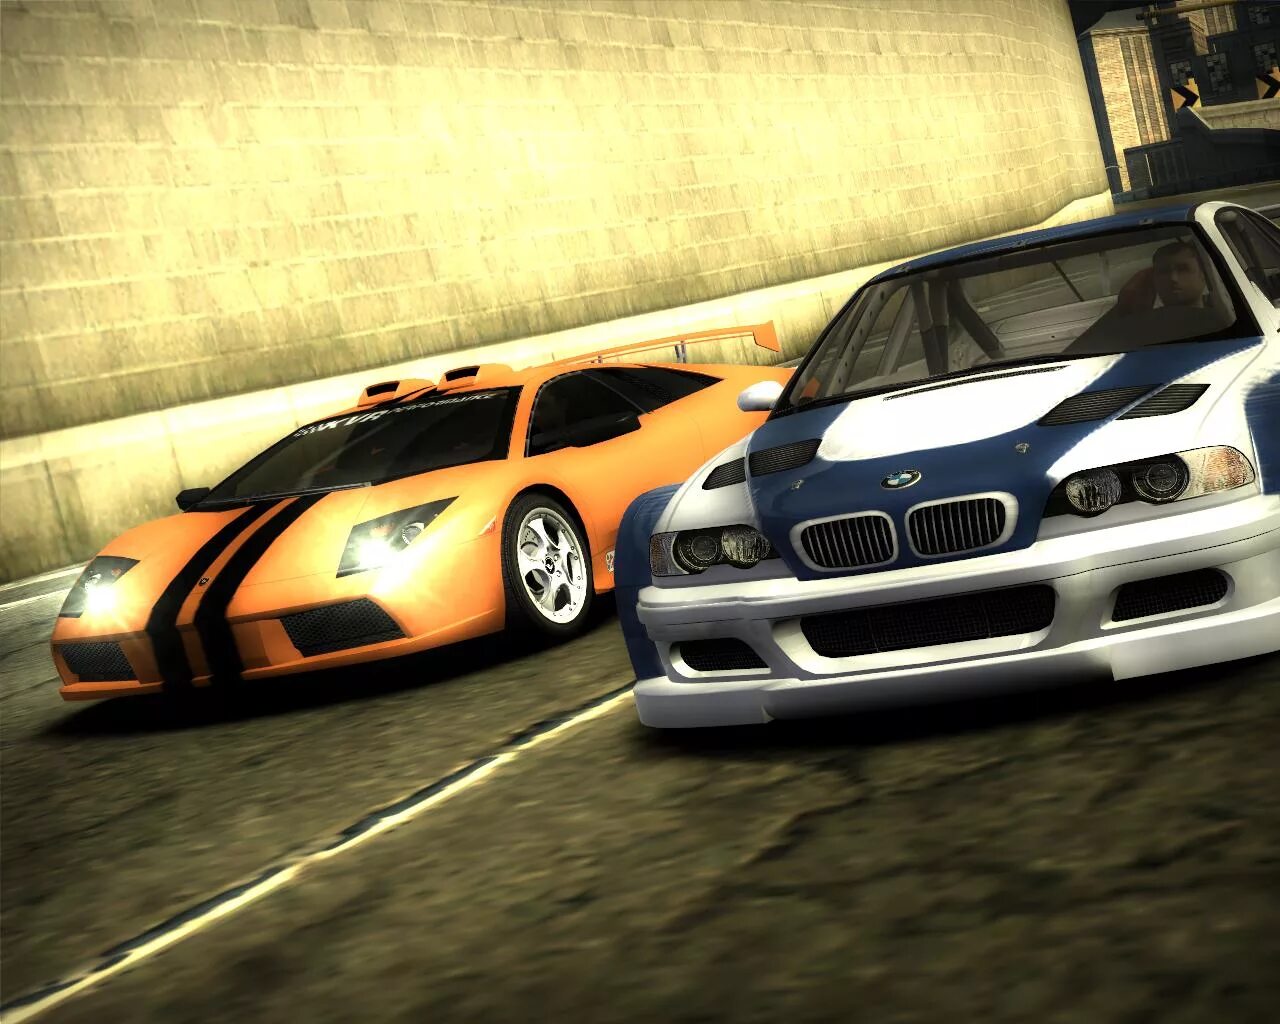 BMW most wanted 2005. БМВ NFS most wanted. NFS most wanted 2005 БМВ. NFS MW 2005 BMW. Nfs mw cars